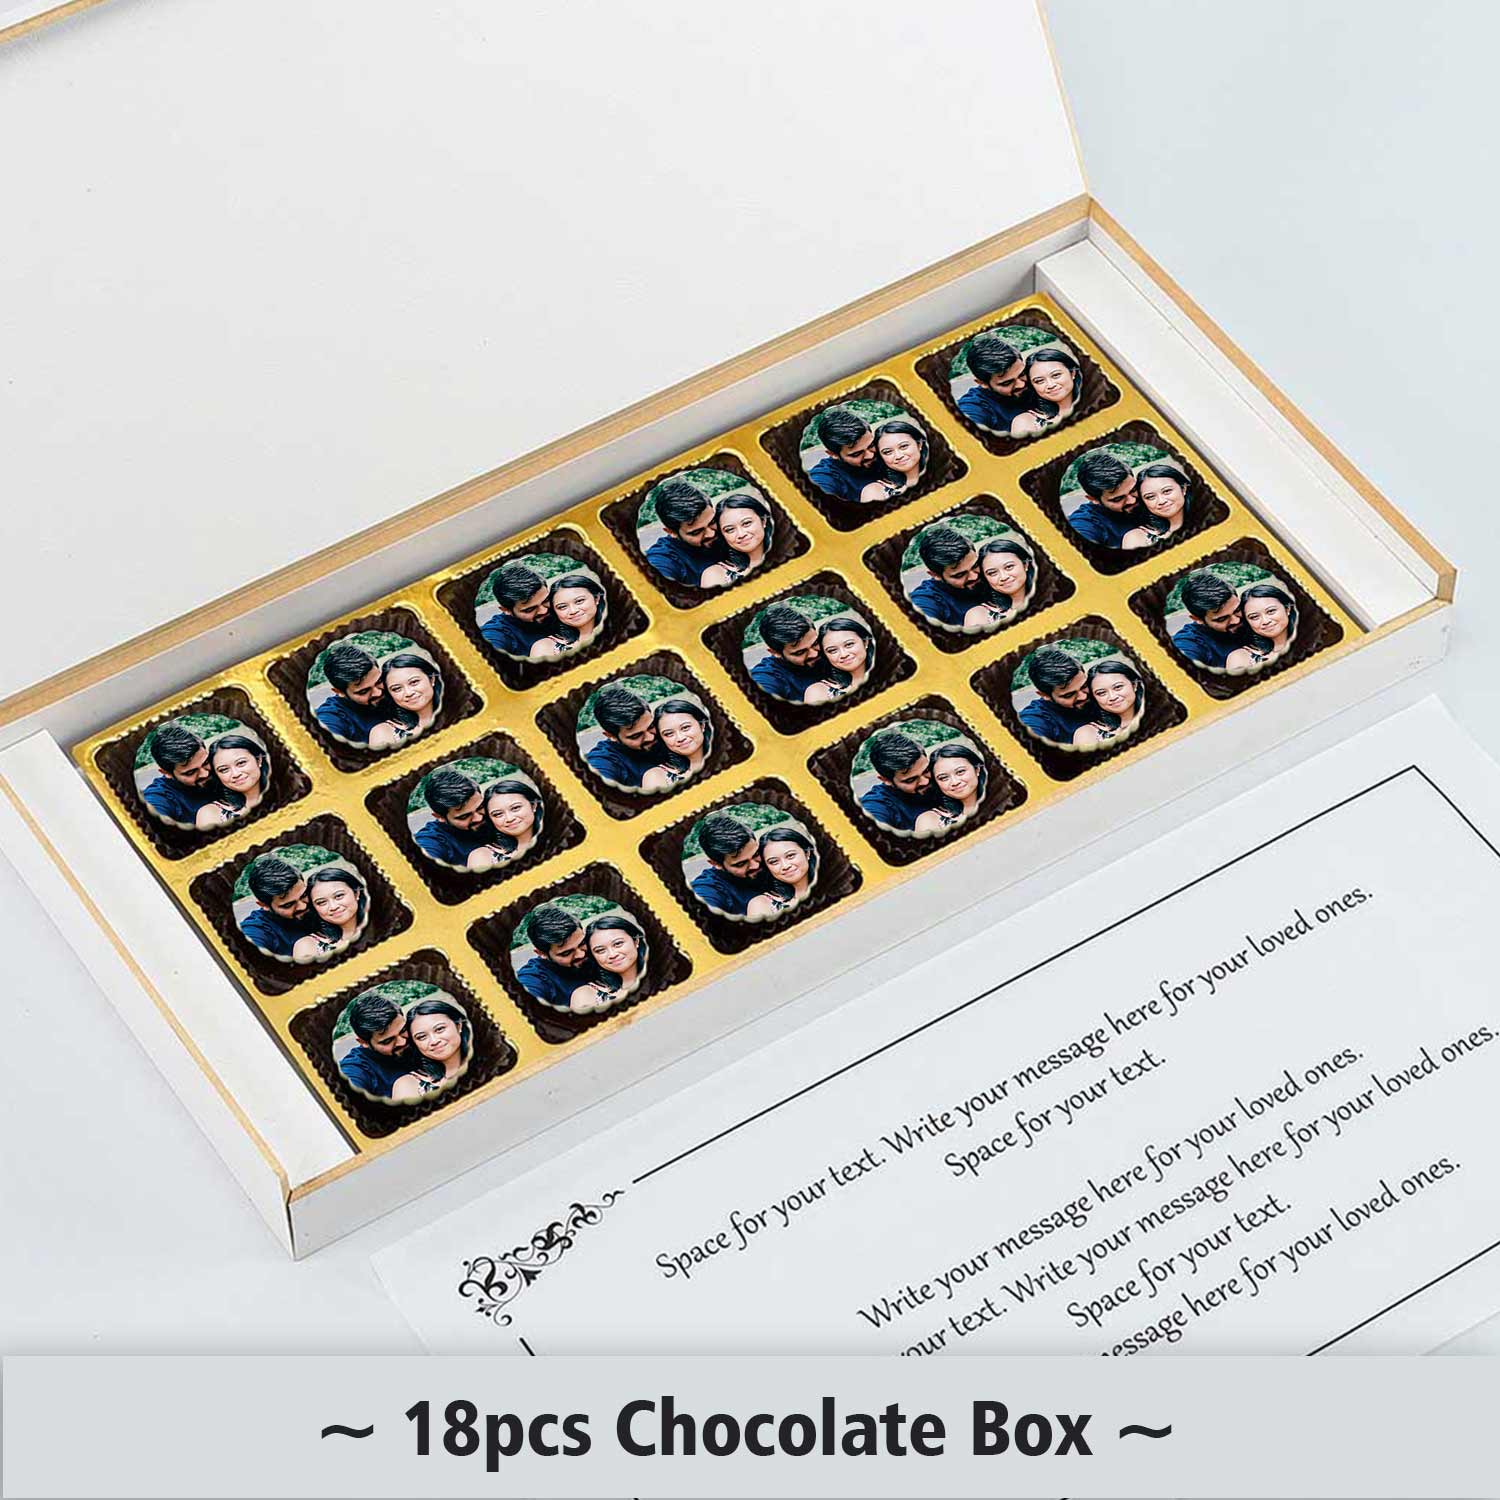 Make your anniversary happiest with customised chocolates